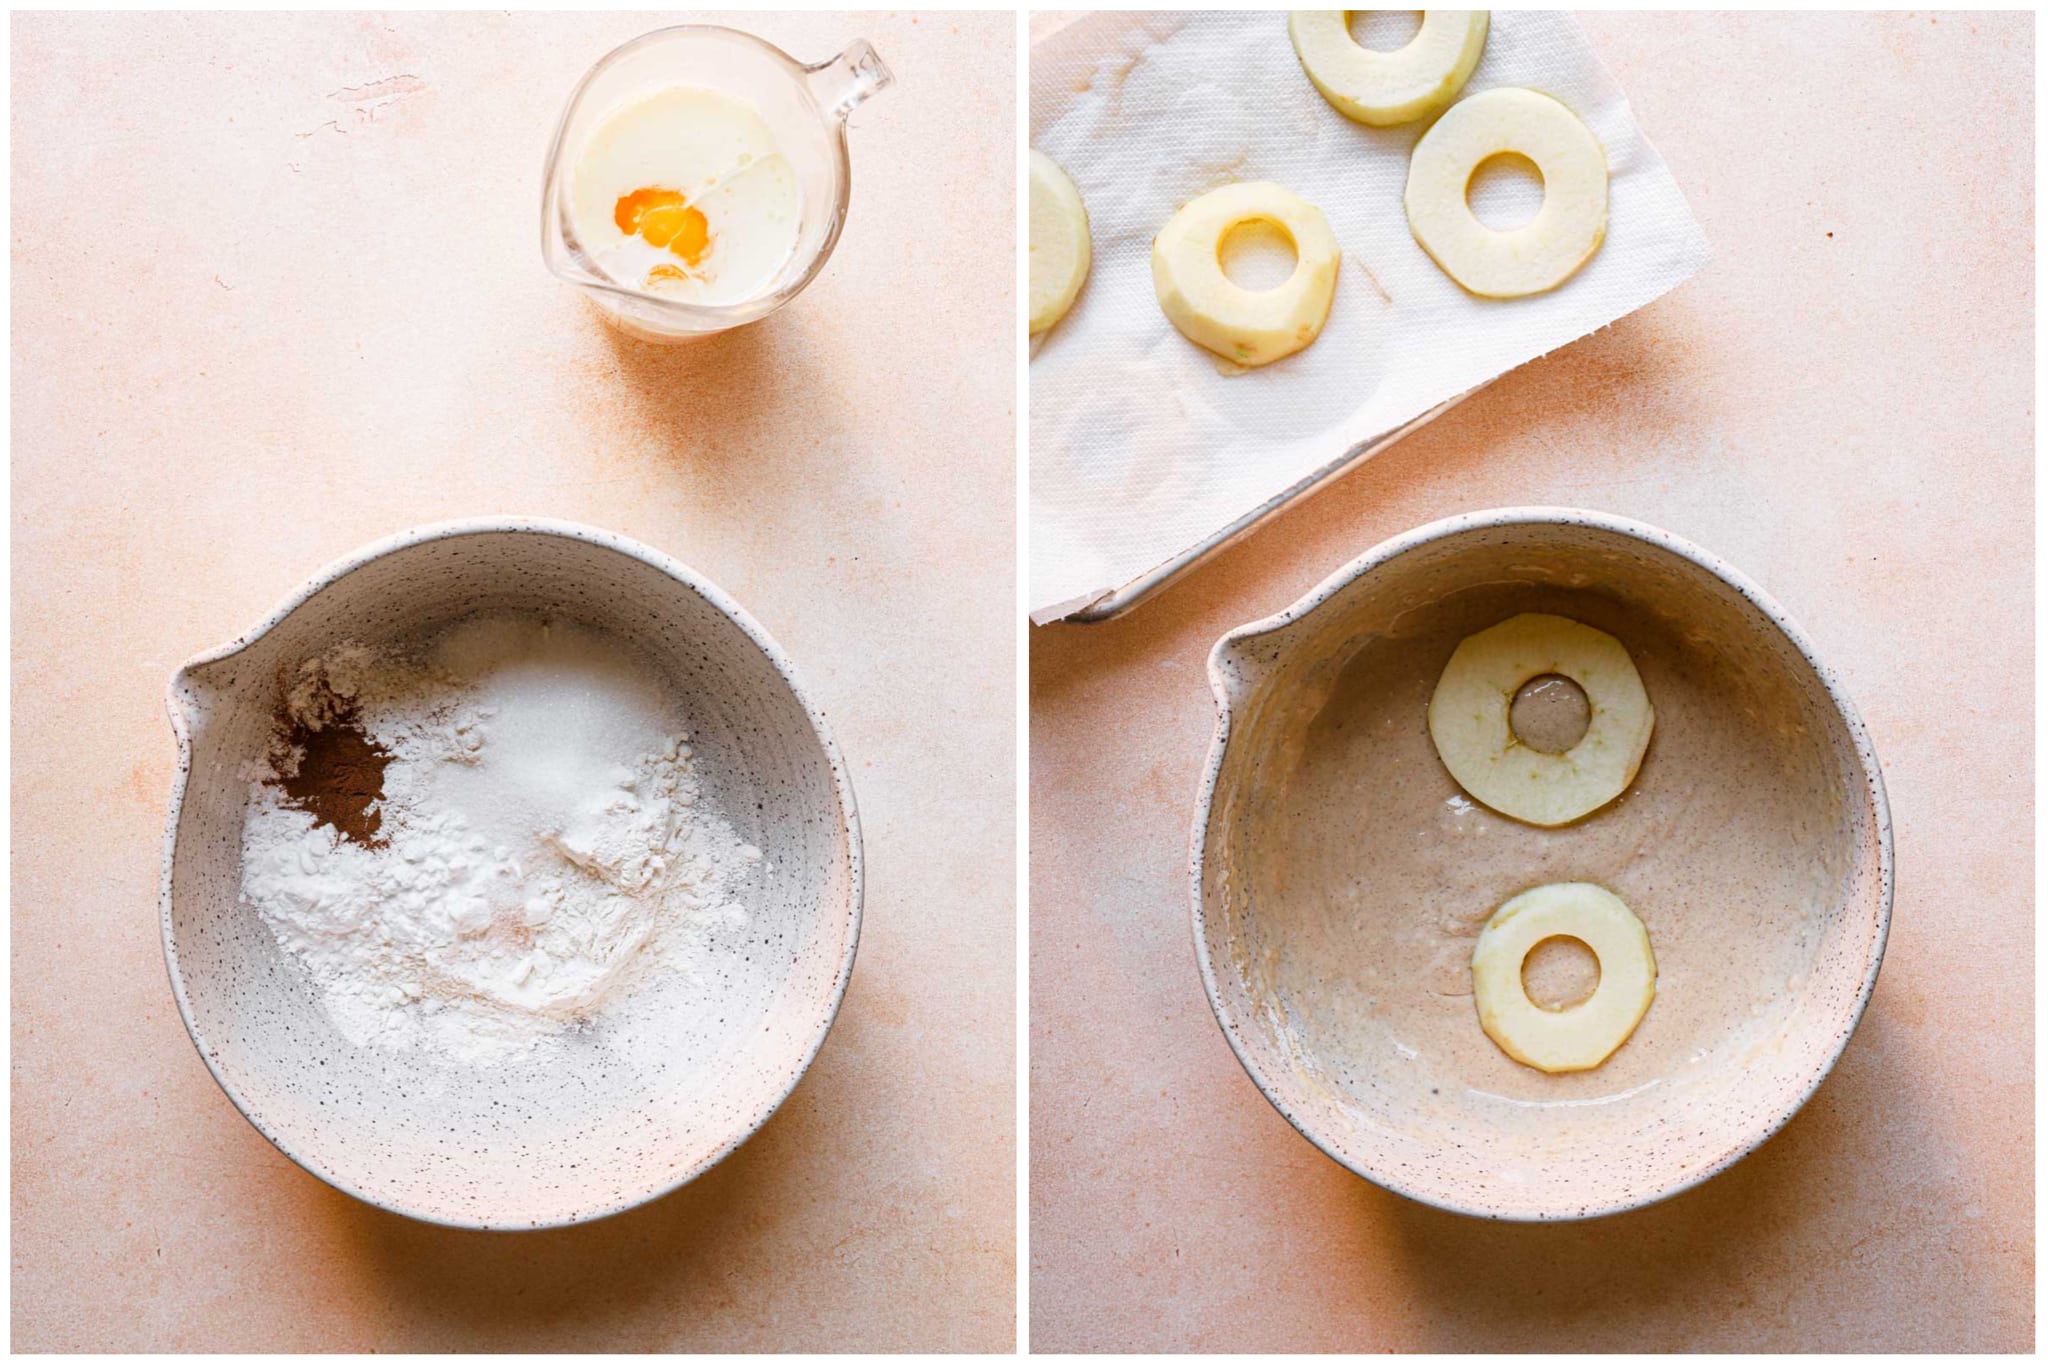 A side-by-side photo shows the process of making apple fritters. On the left, the batter is mixed in a bowl, on the right, two apple rings are dunked in the batter.